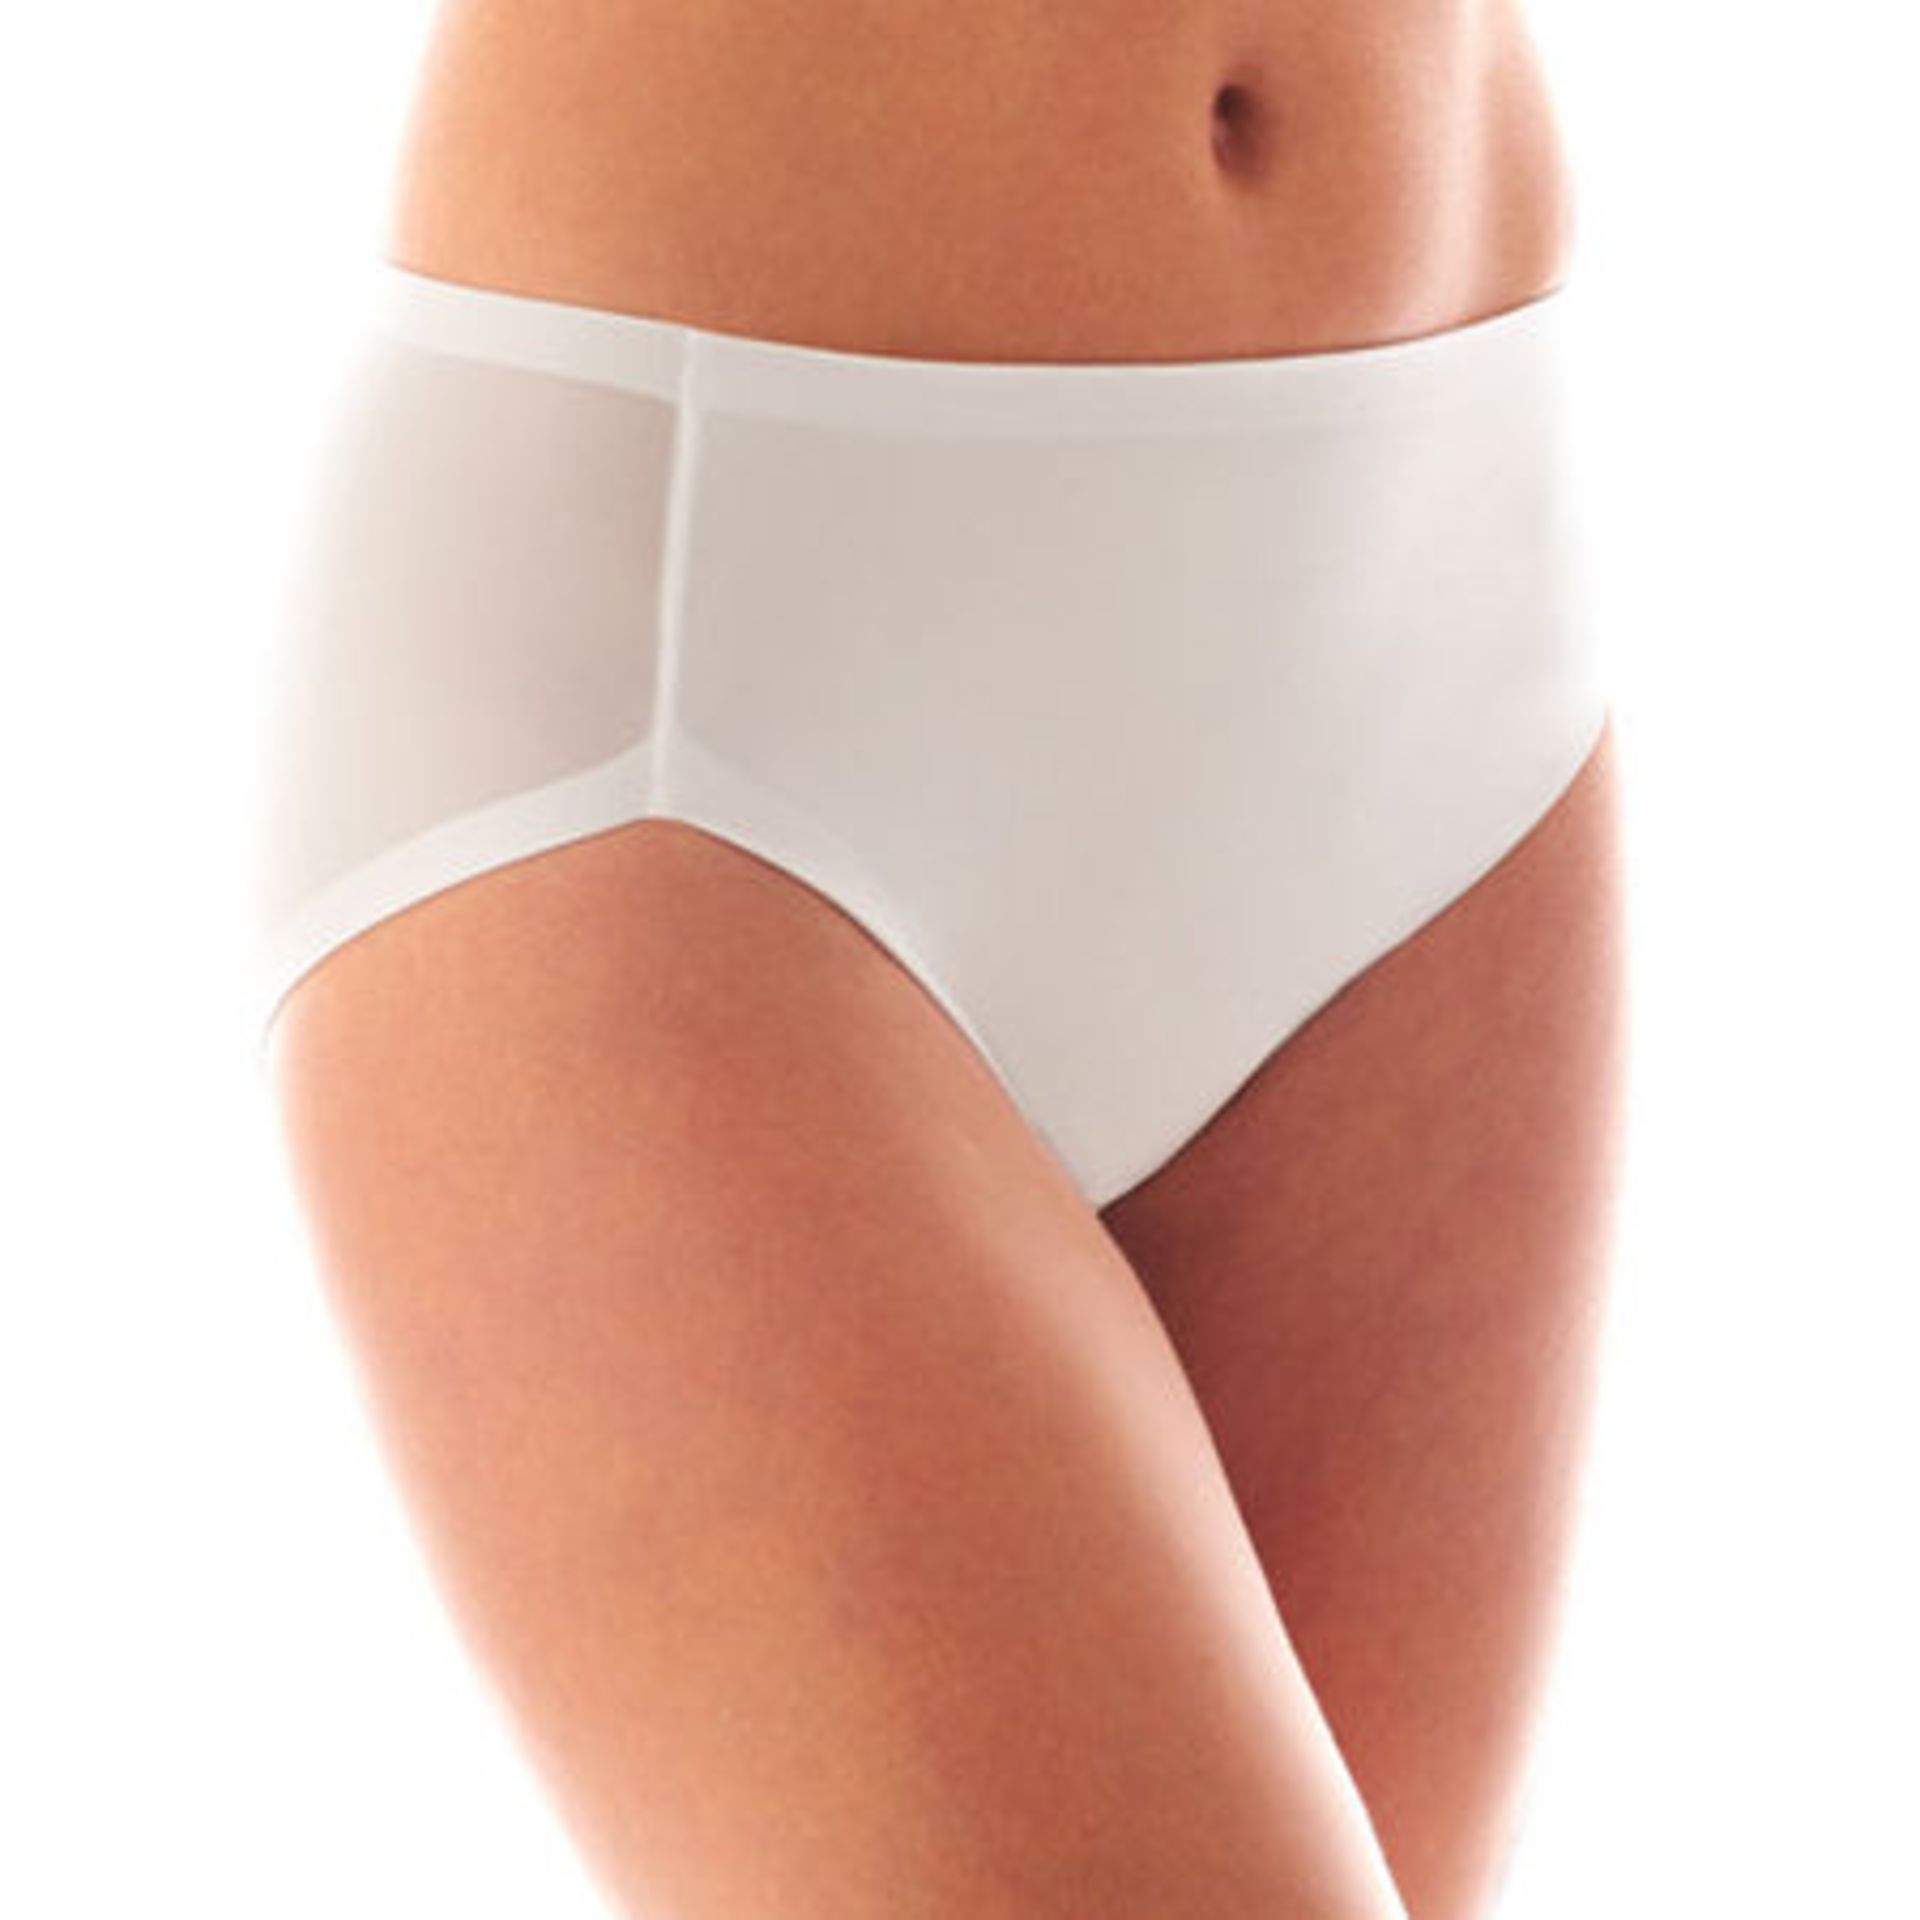 V Brand New A Lot of Two Pairs White Maidenform Hi-Cut Briefs Size S ISP $29 Each (Hosiery & More)